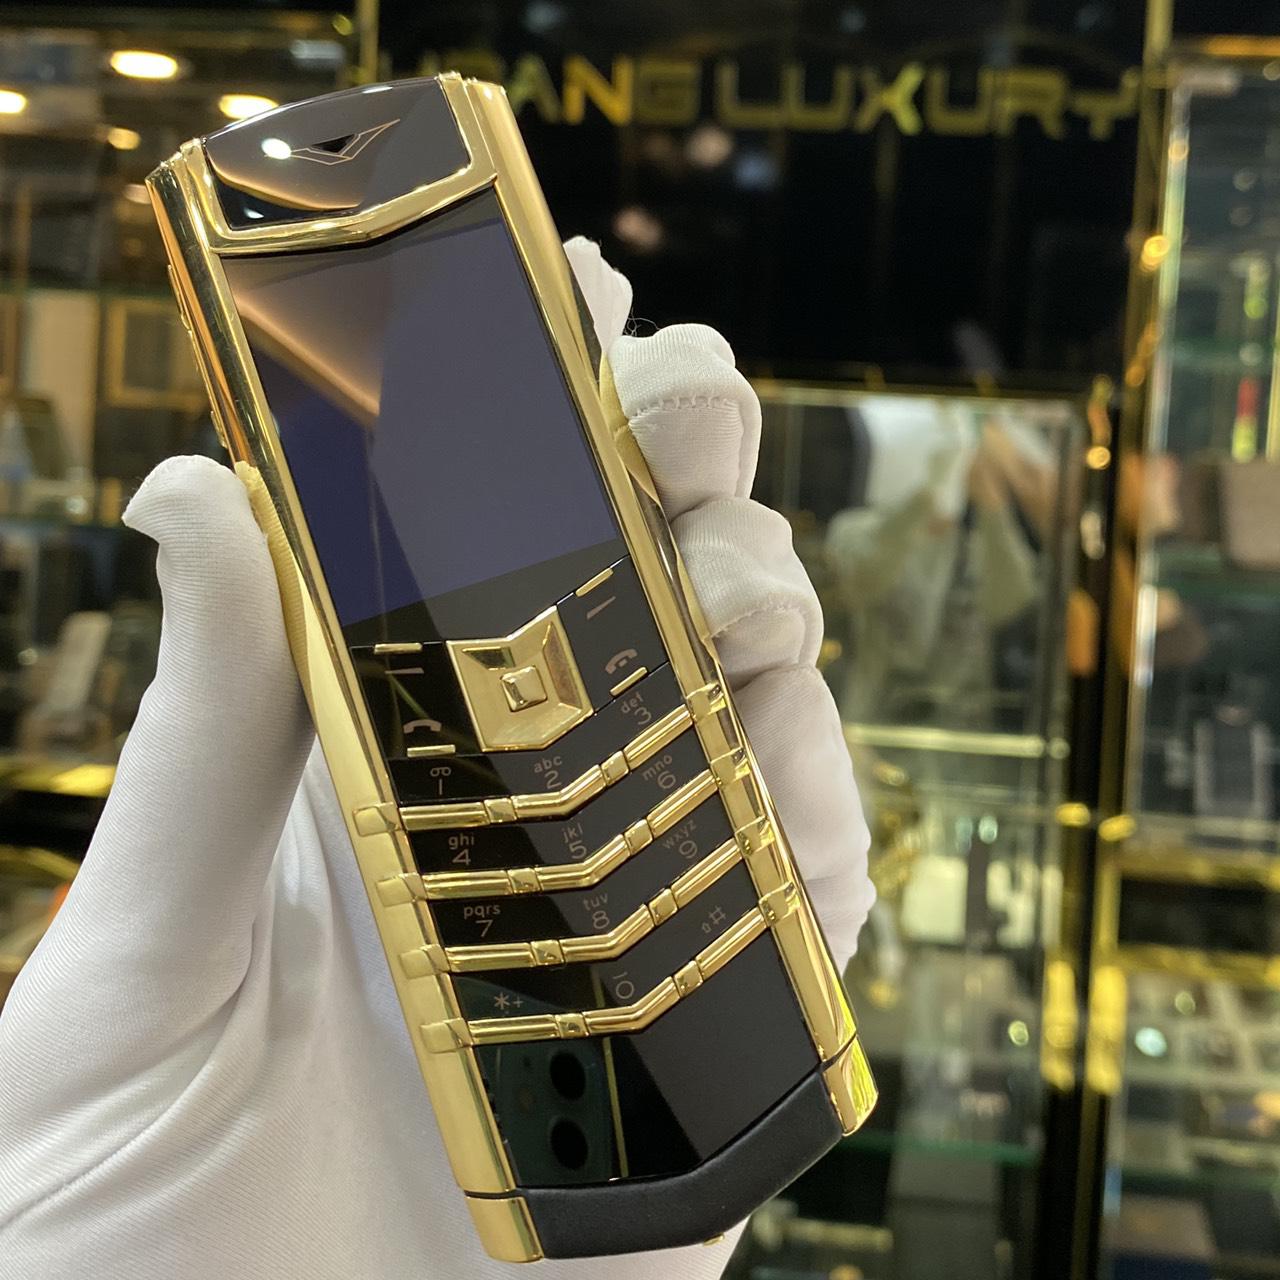 The ups and downs of the popular phone brand Vertu - Photo 1.